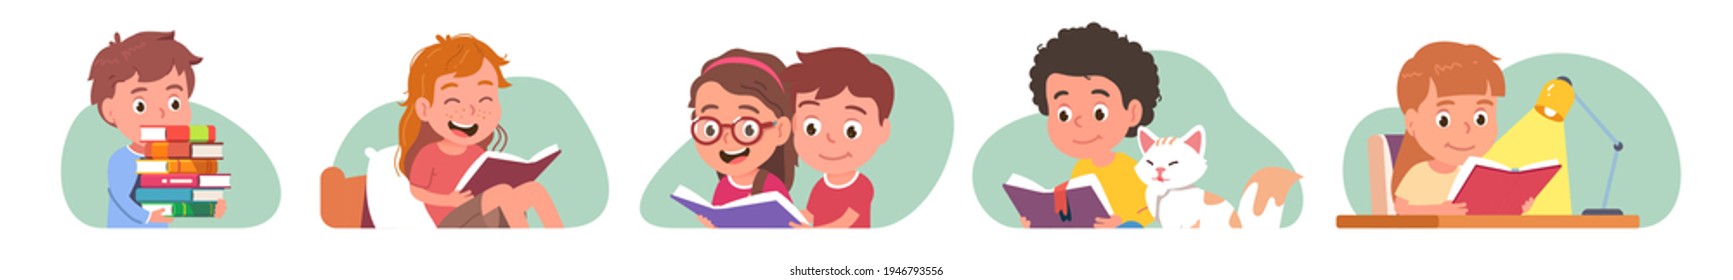 Reading kids set. Student people study. Boy, girl enjoy literature, books, education, do homework reading. Happy children hold paper book together, at home, desk, in bed. Vector character illustration